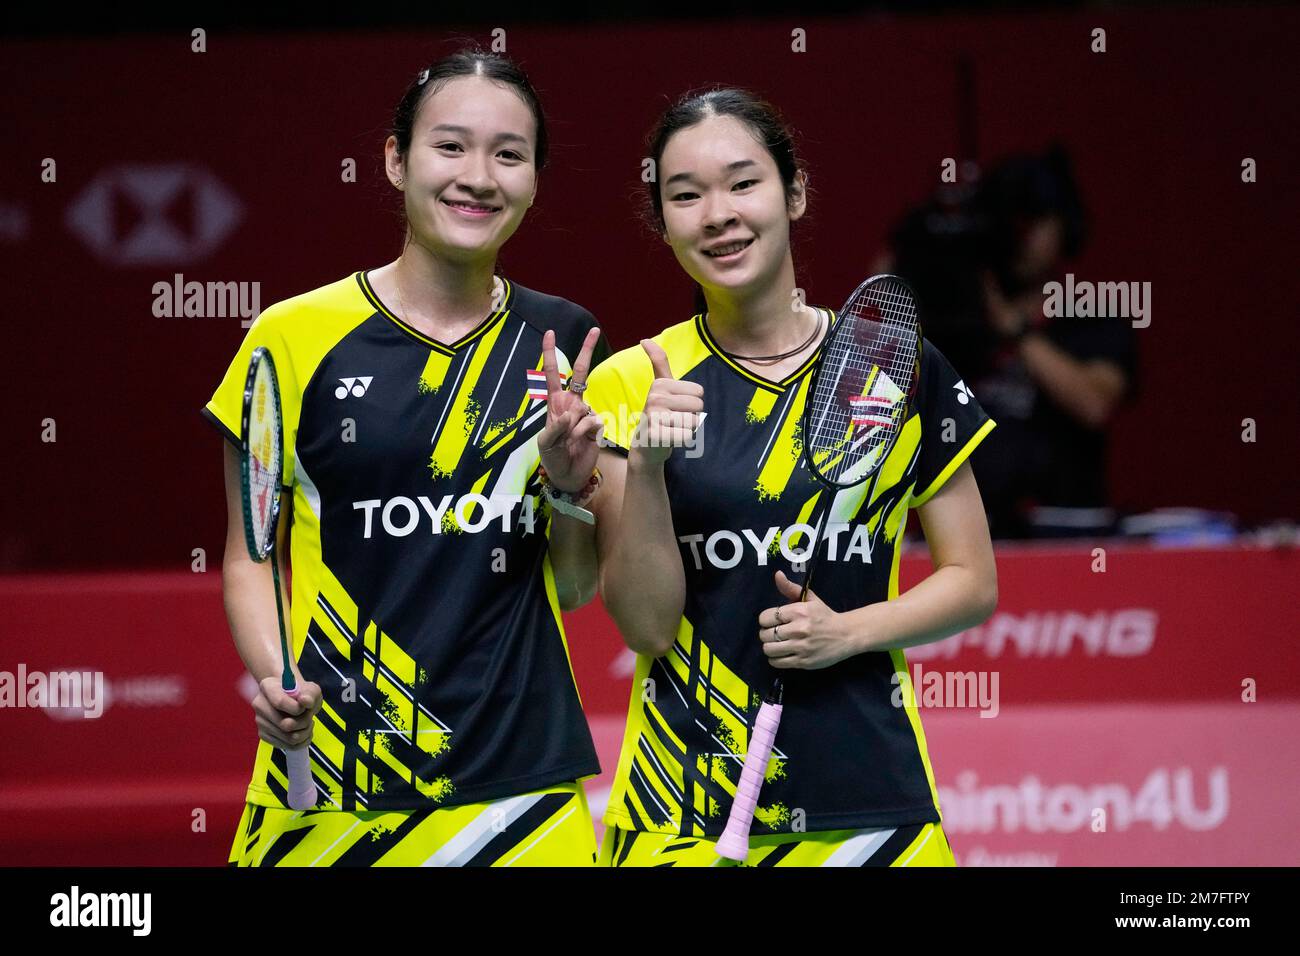 Thailands Benyapa Aimsaard, left, and Nuntakarn Aimsaard pose for a photographers after wining the match against South Koreas Kim Hye-jeong, and Jeong Na-eun during their womens doubles semi-final badminton match at the